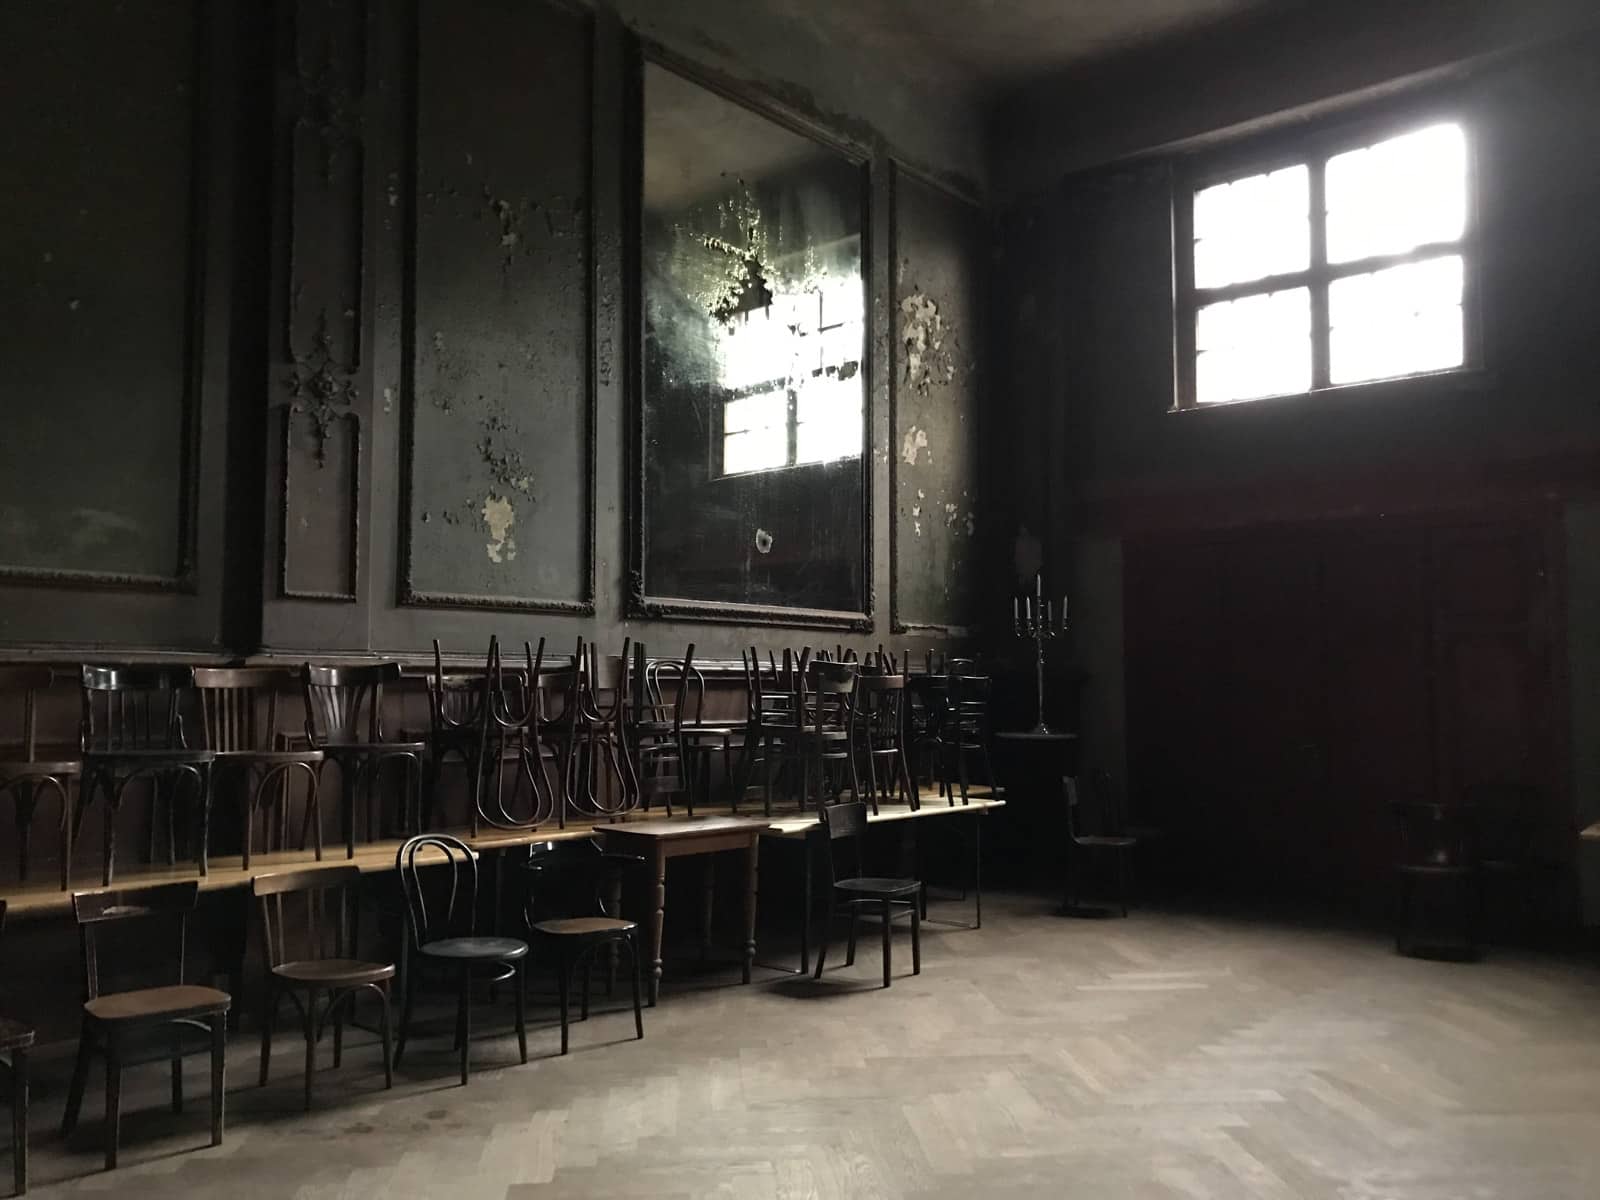 The dark interior of an old ballroom with stacks of chairs on the sides, old mirrors on the walls